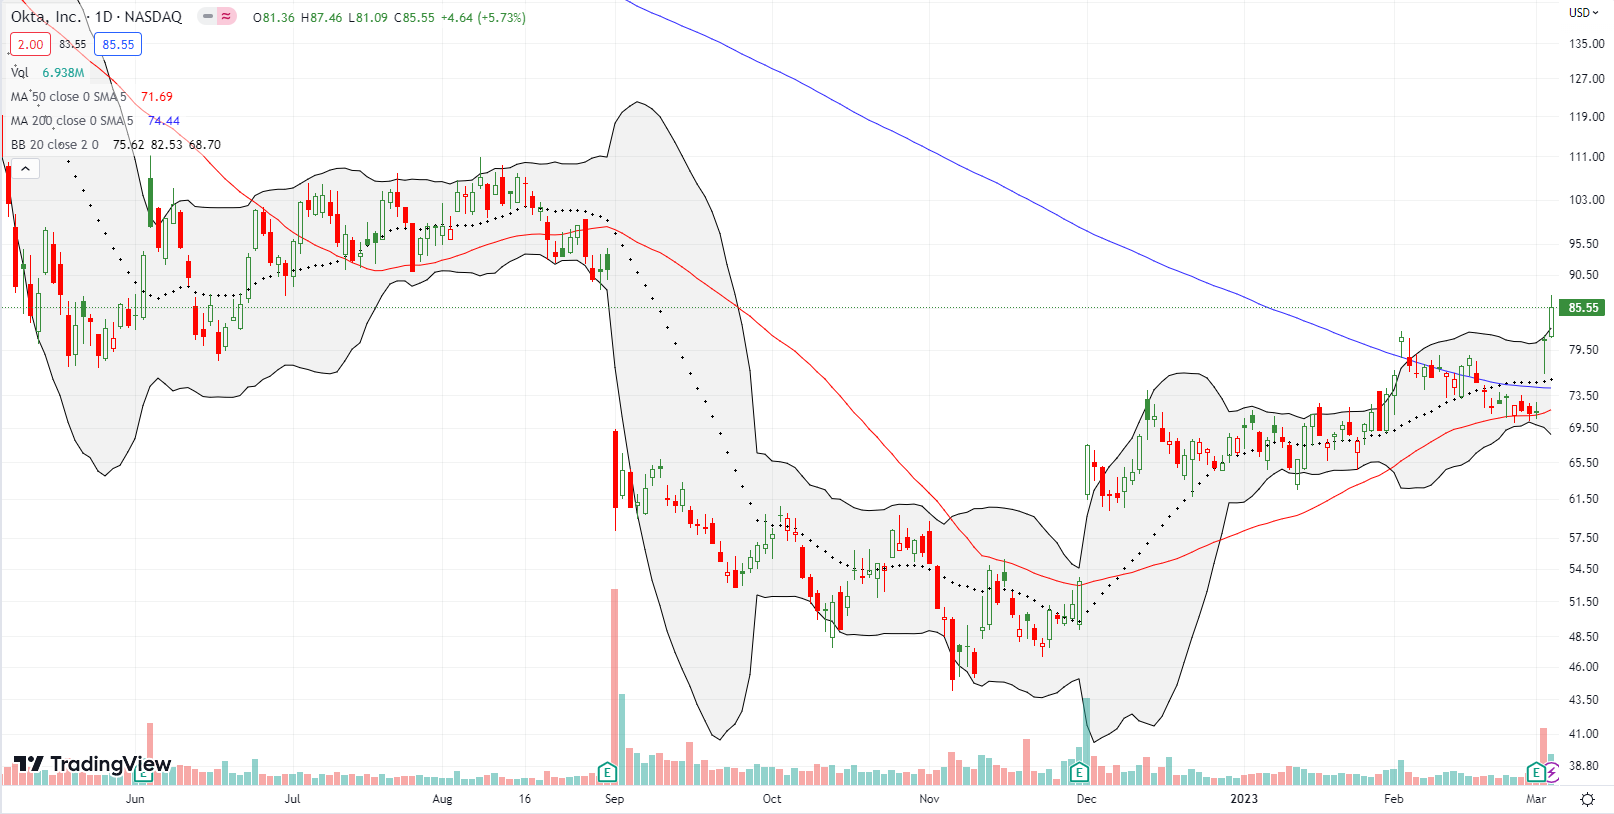 Okta, Inc (OKTA) managed to follow-through on post-earnings gains with a breakout to a 6-month high.